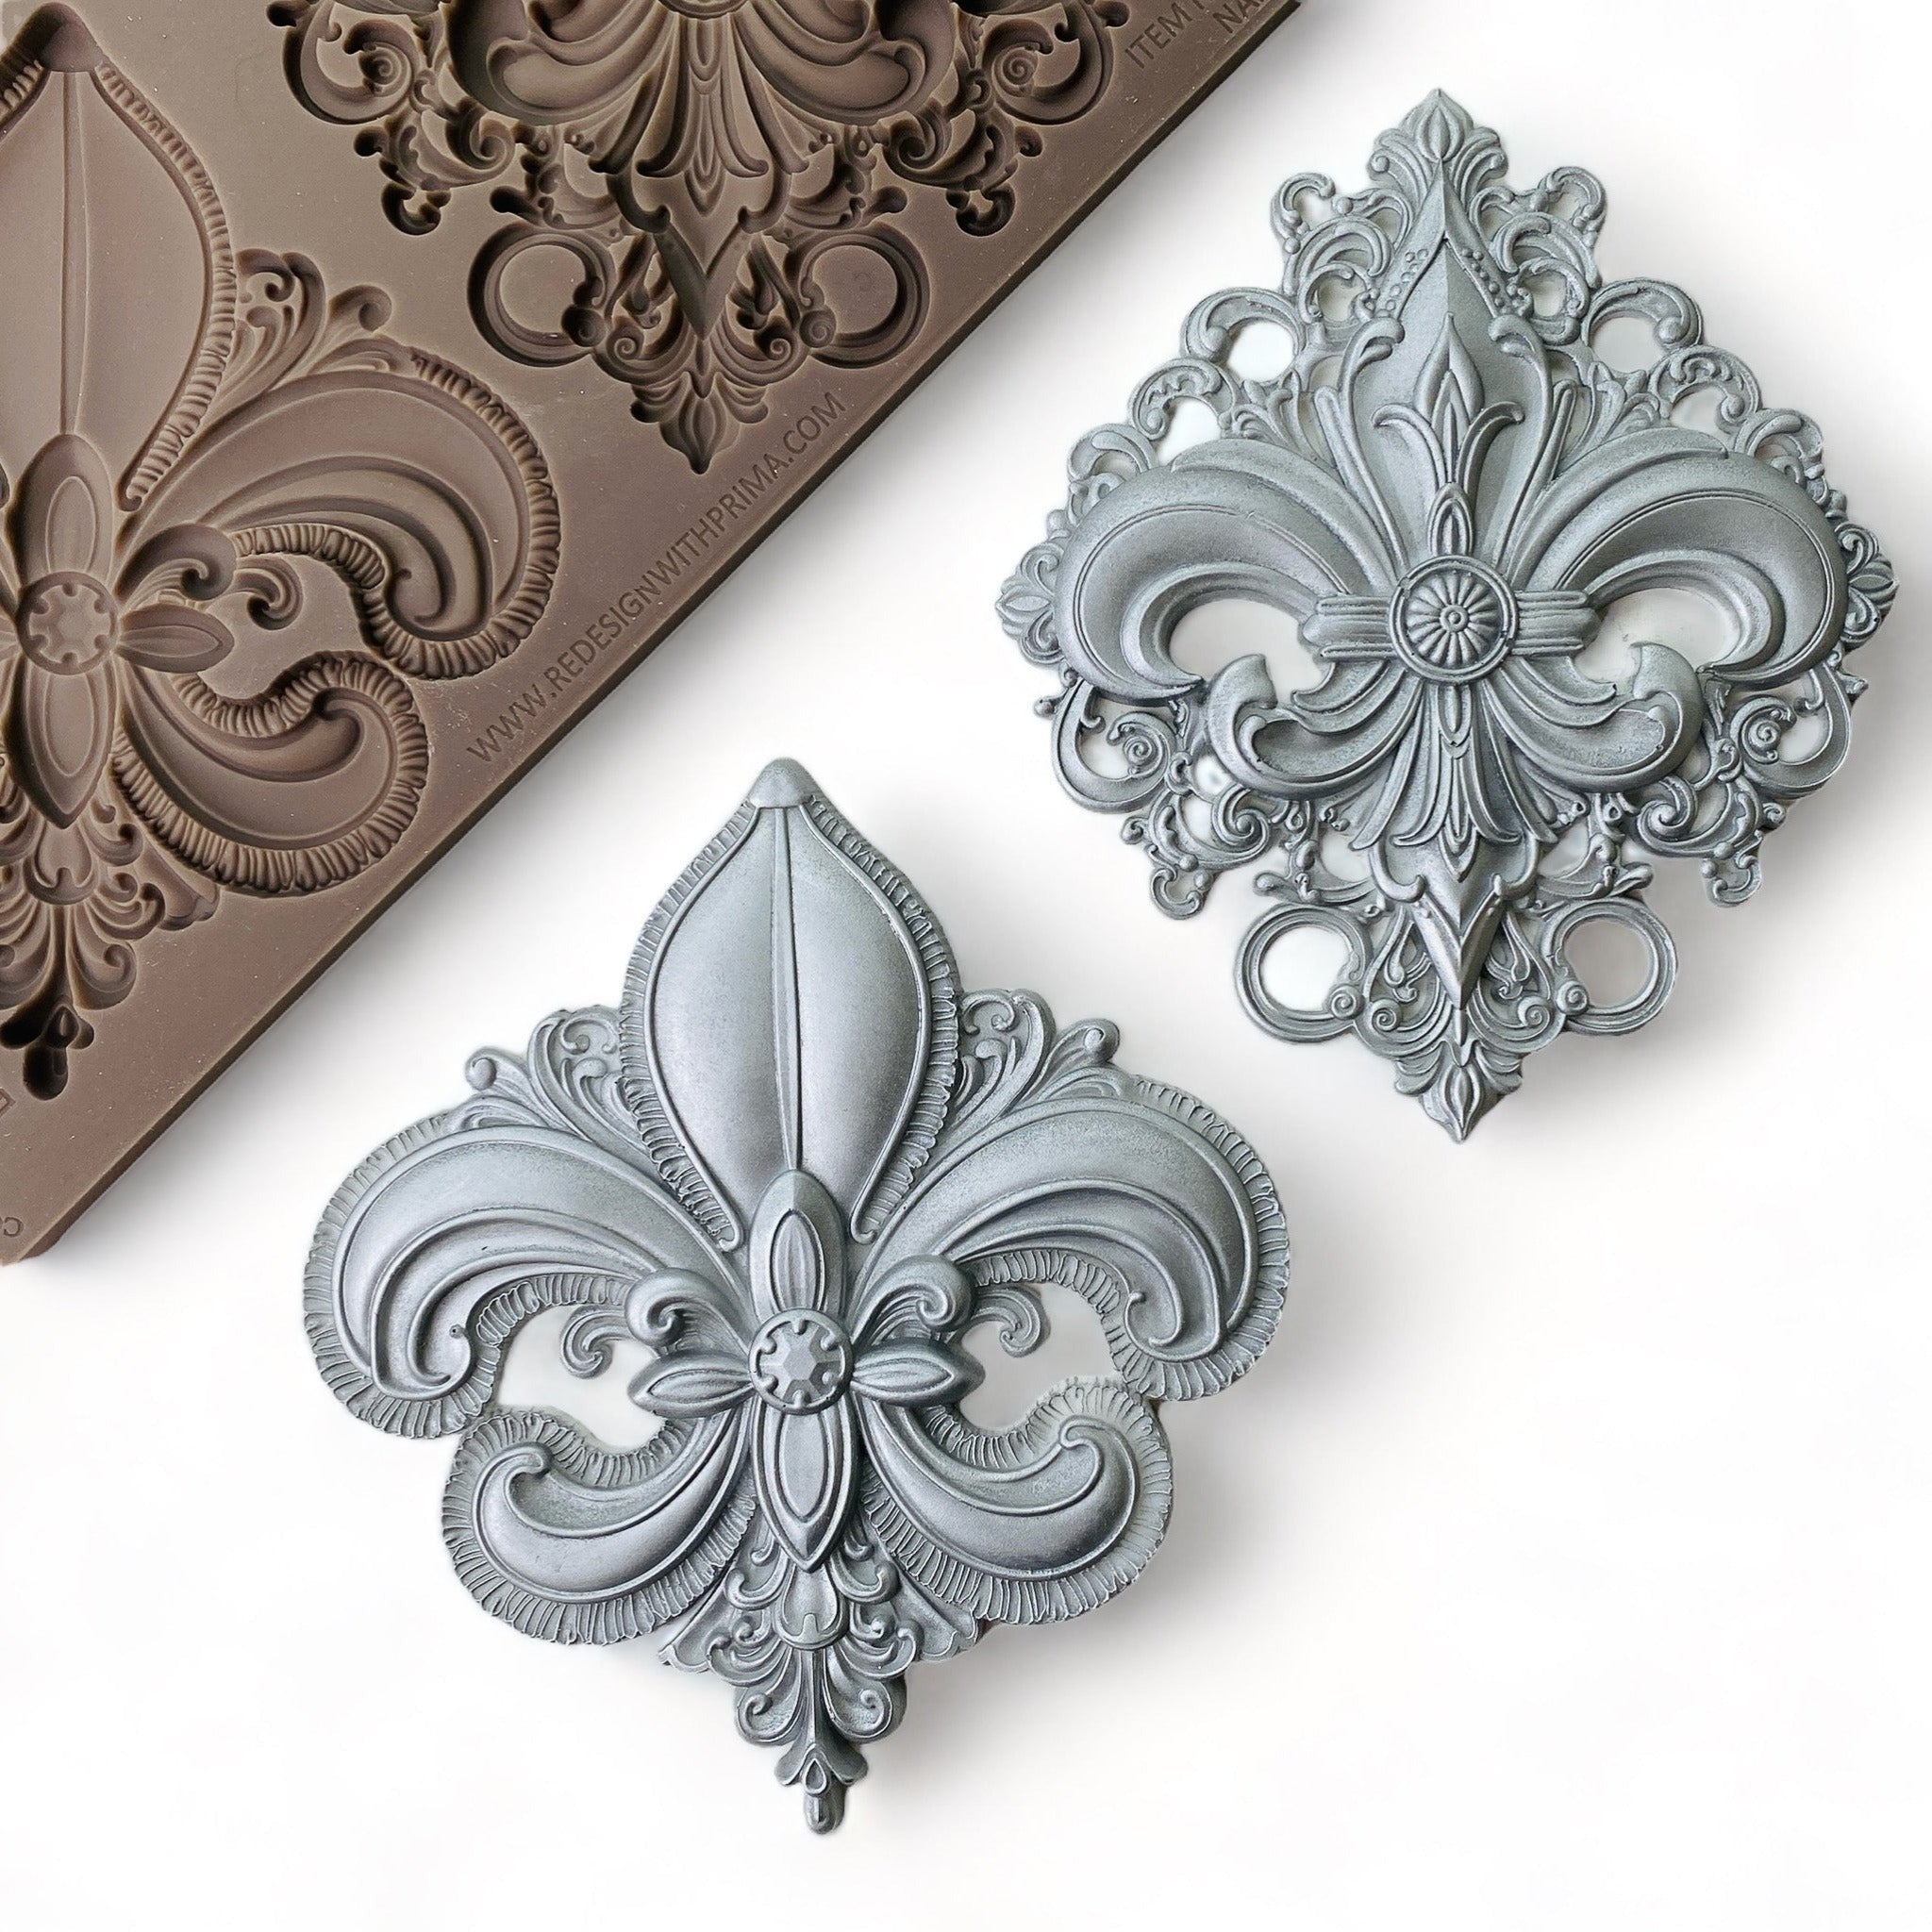 A brown silicone mold and silver-colored castings of 2 large ornate Fleur de Lis designs are against a white background.